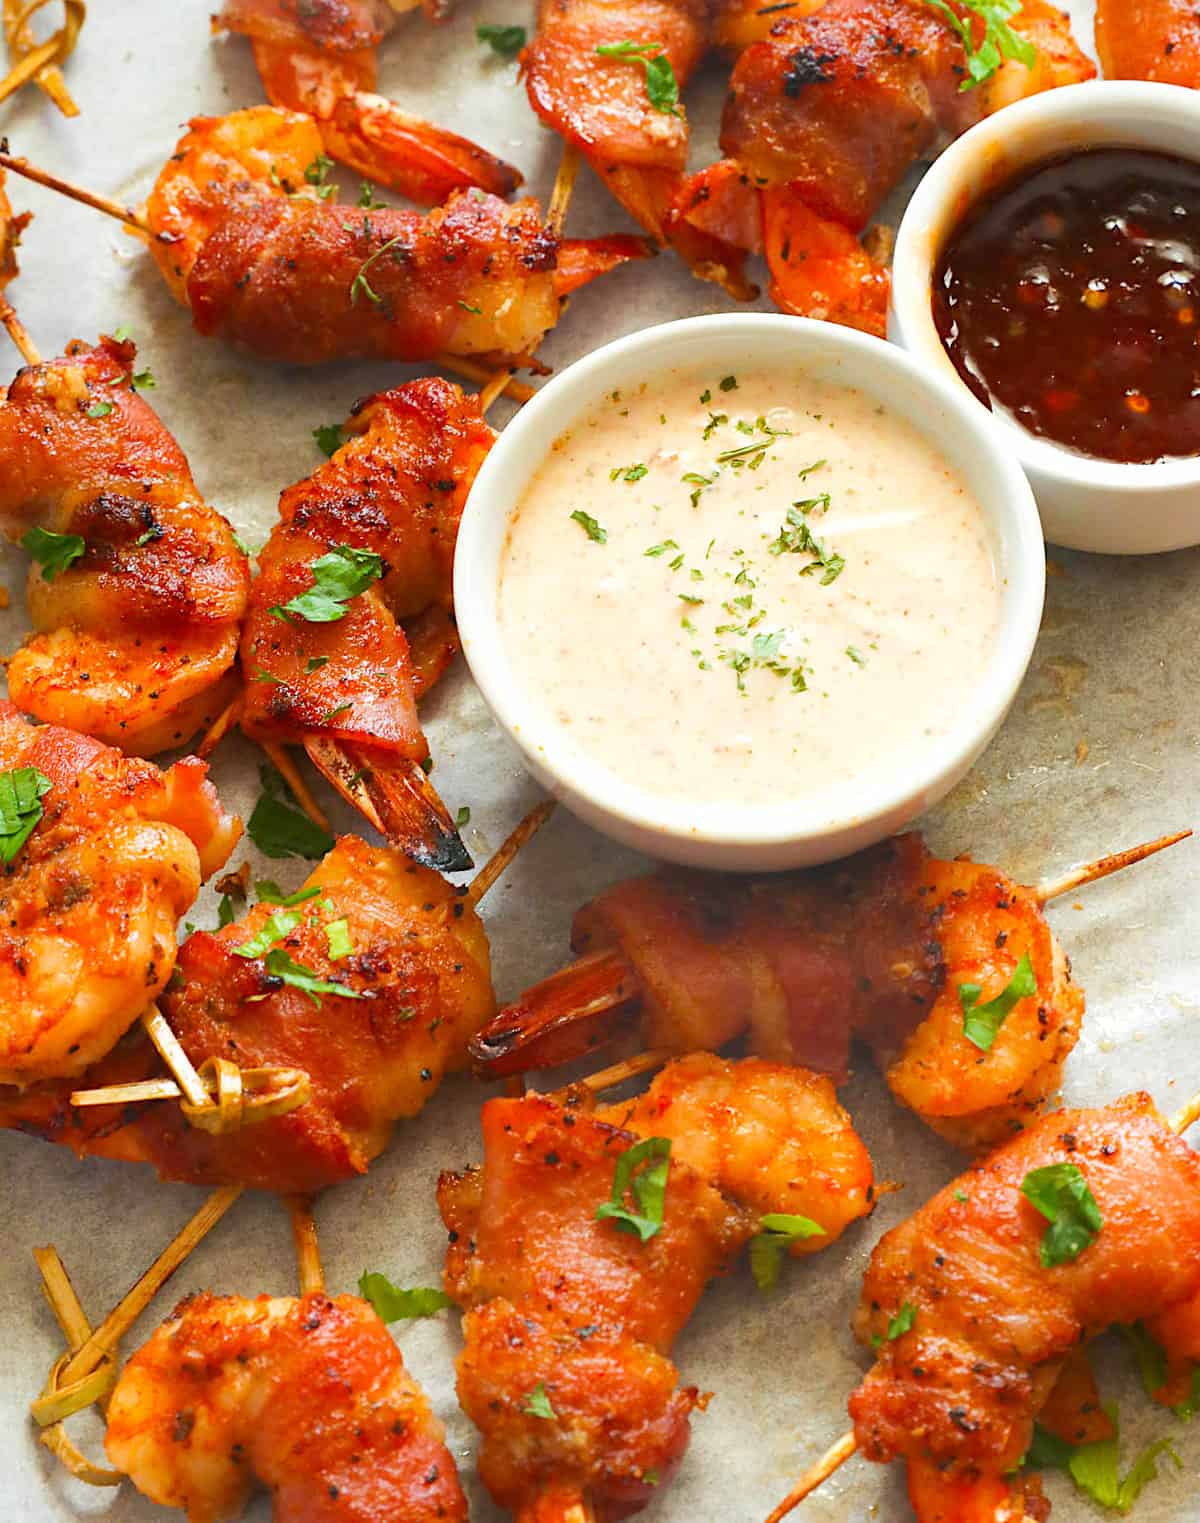 Bacon-Wrapped Shrimp is the best of both worlds for meat and seafood lovers